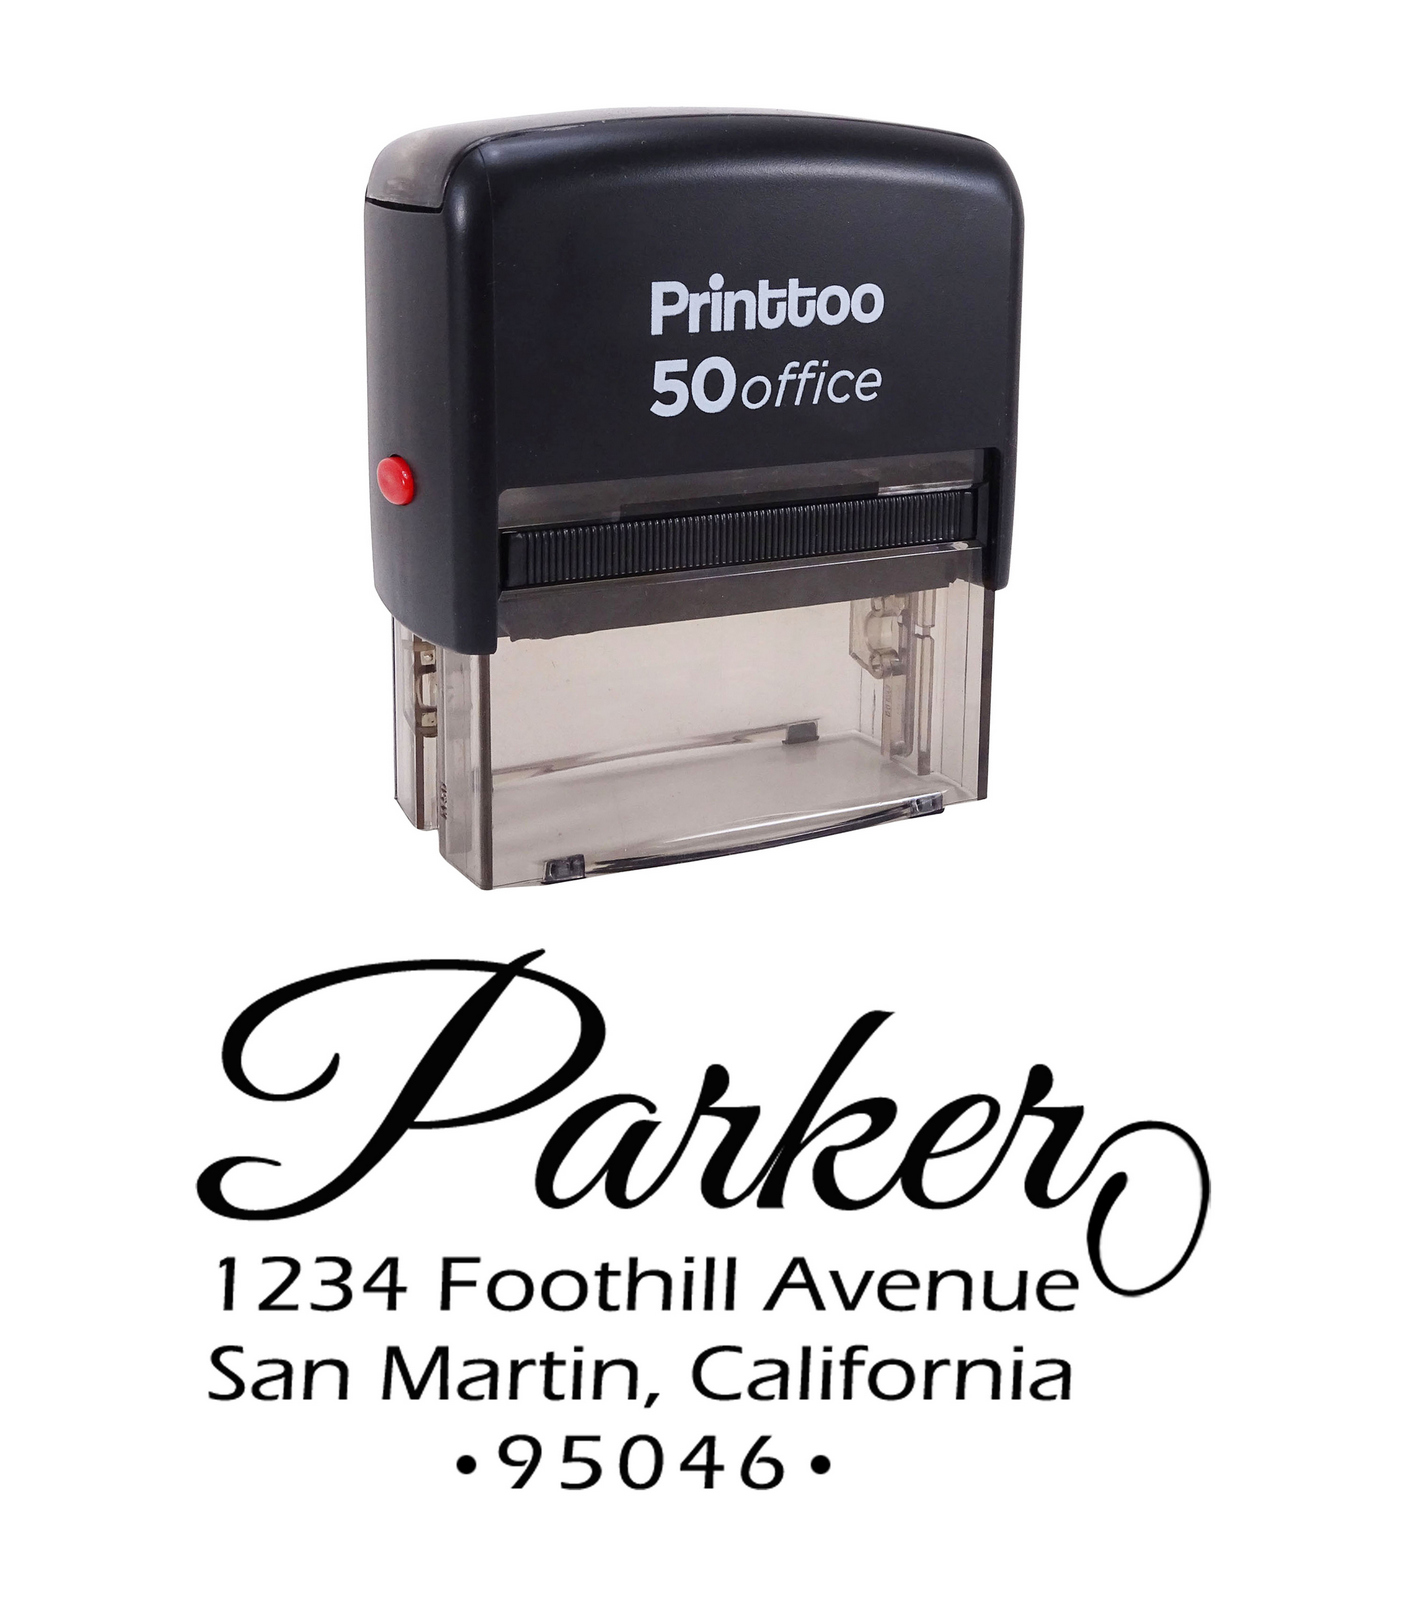 Personalized photo and address self-inking rubber stamp Photo stamp Weddings 